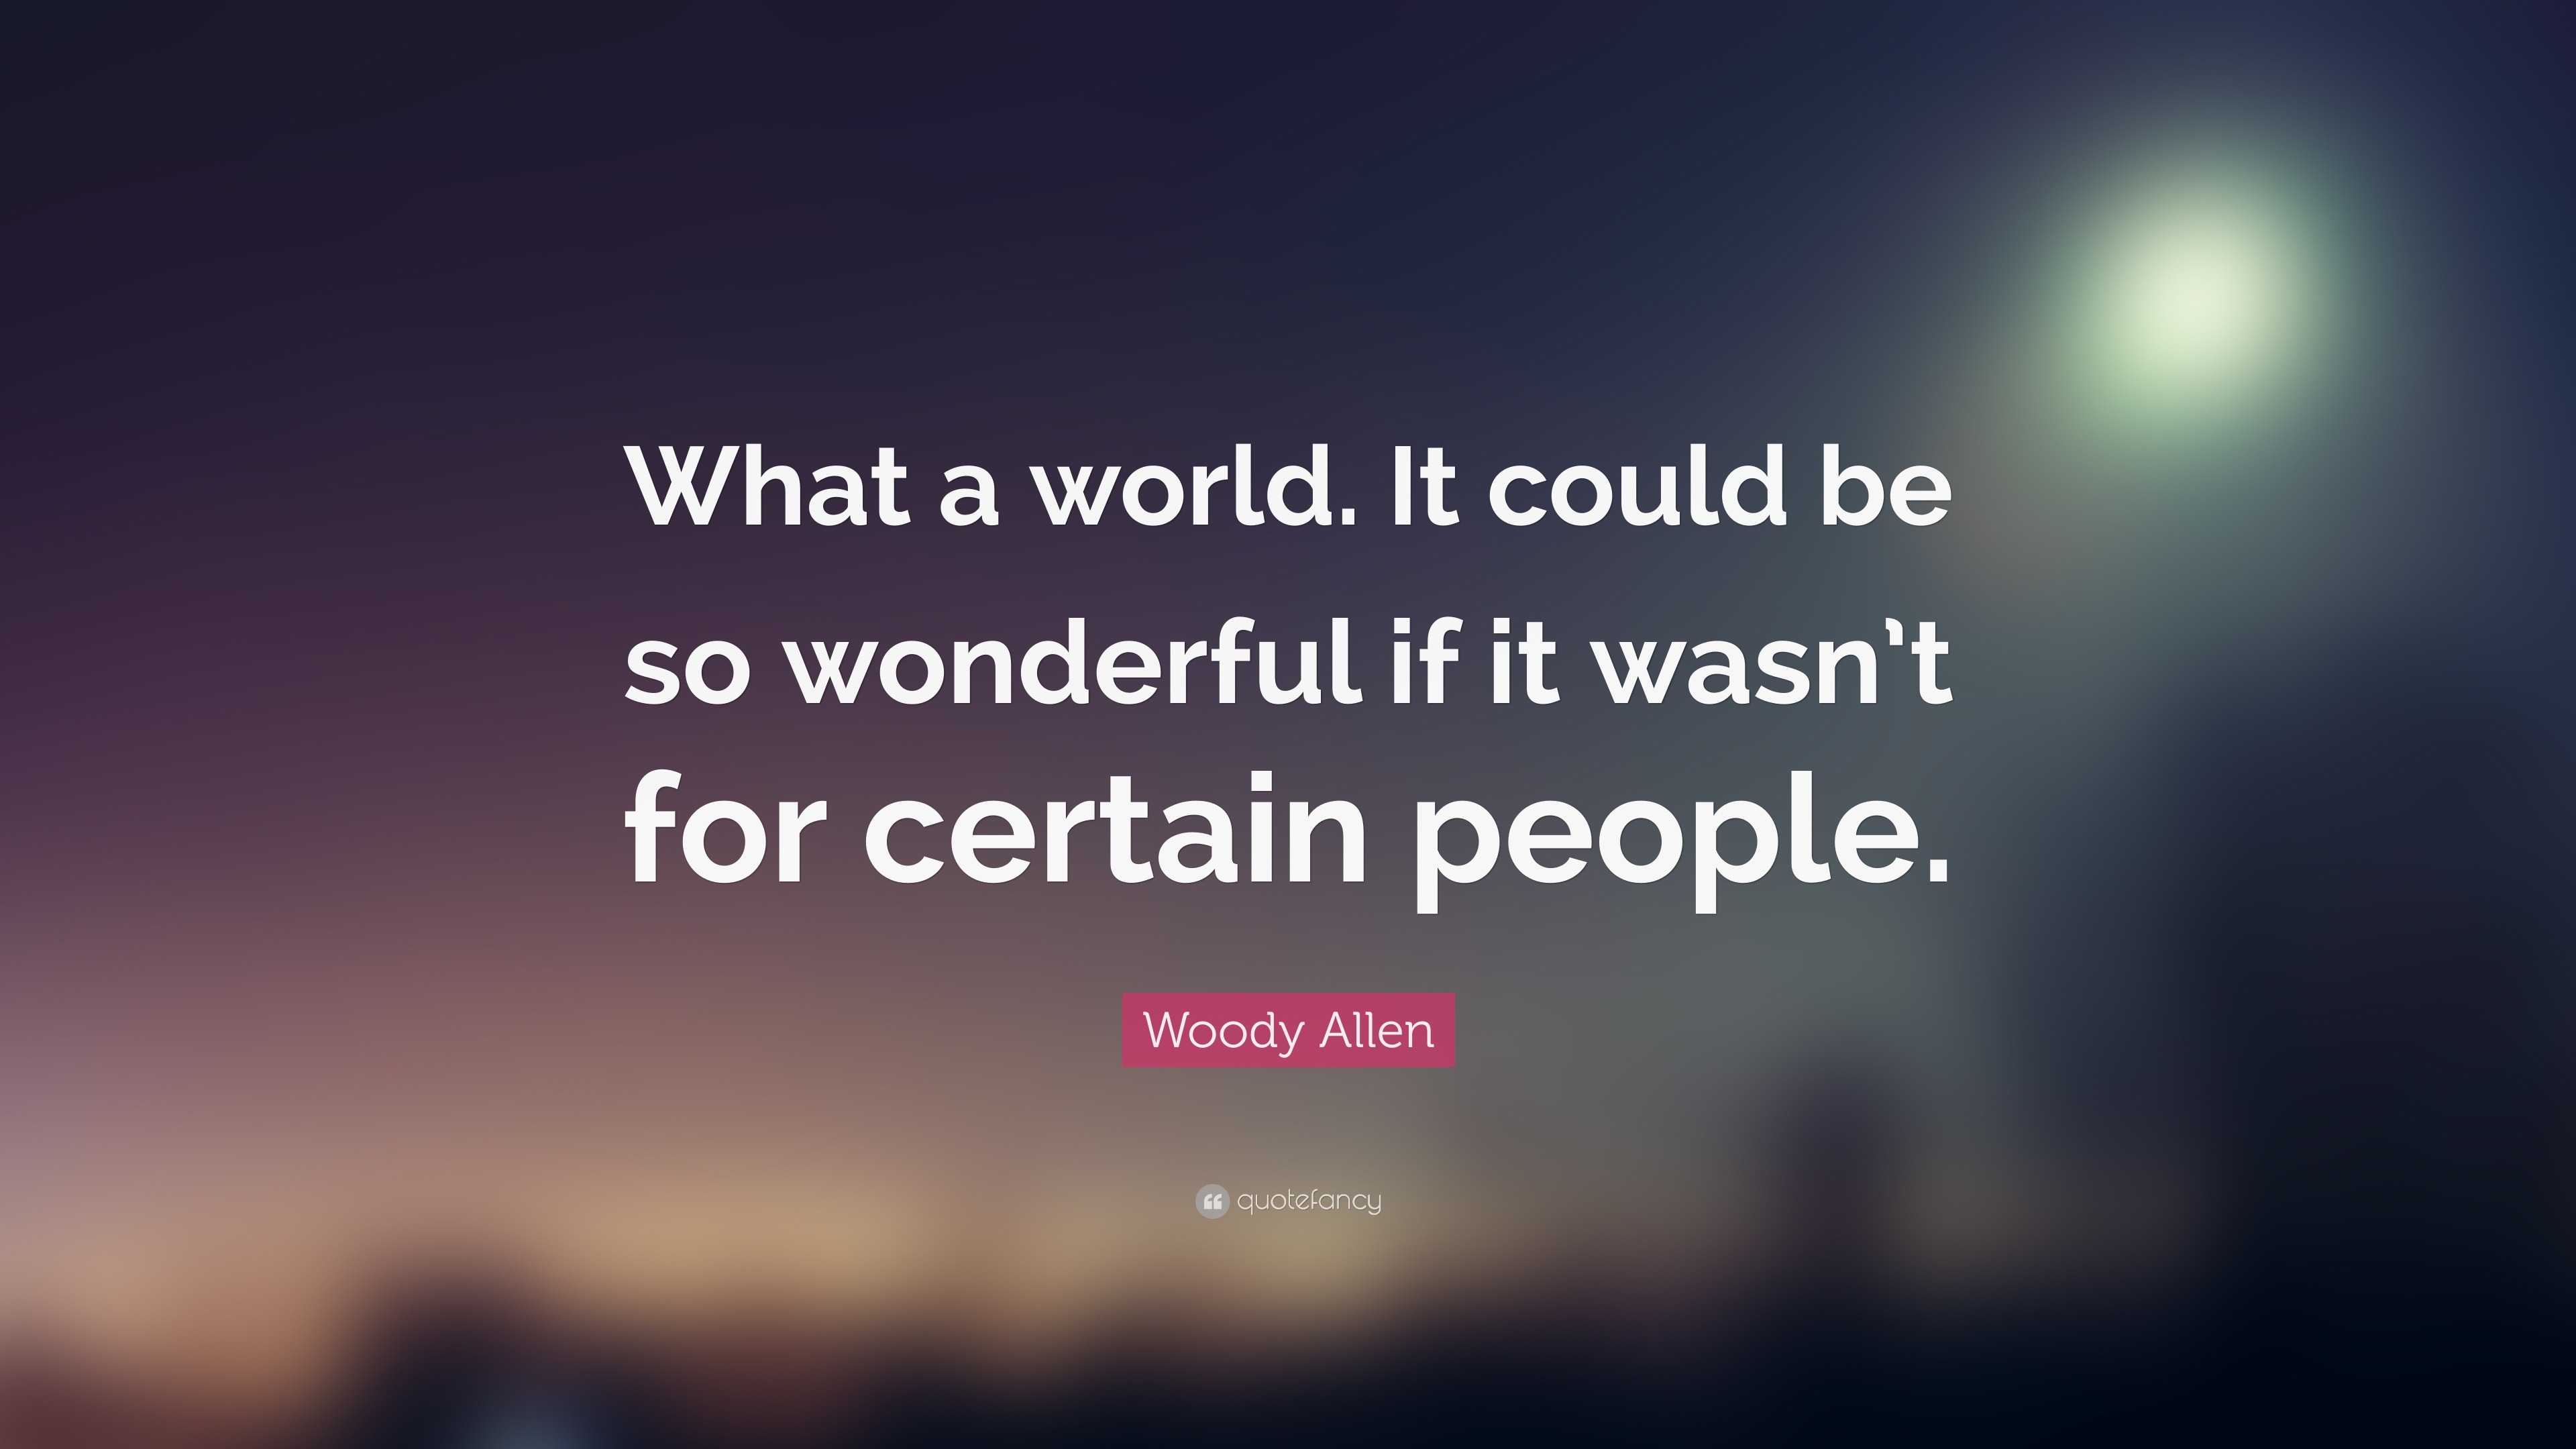 Woody Allen Quote: “What a world. It could be so wonderful if it wasn’t ...